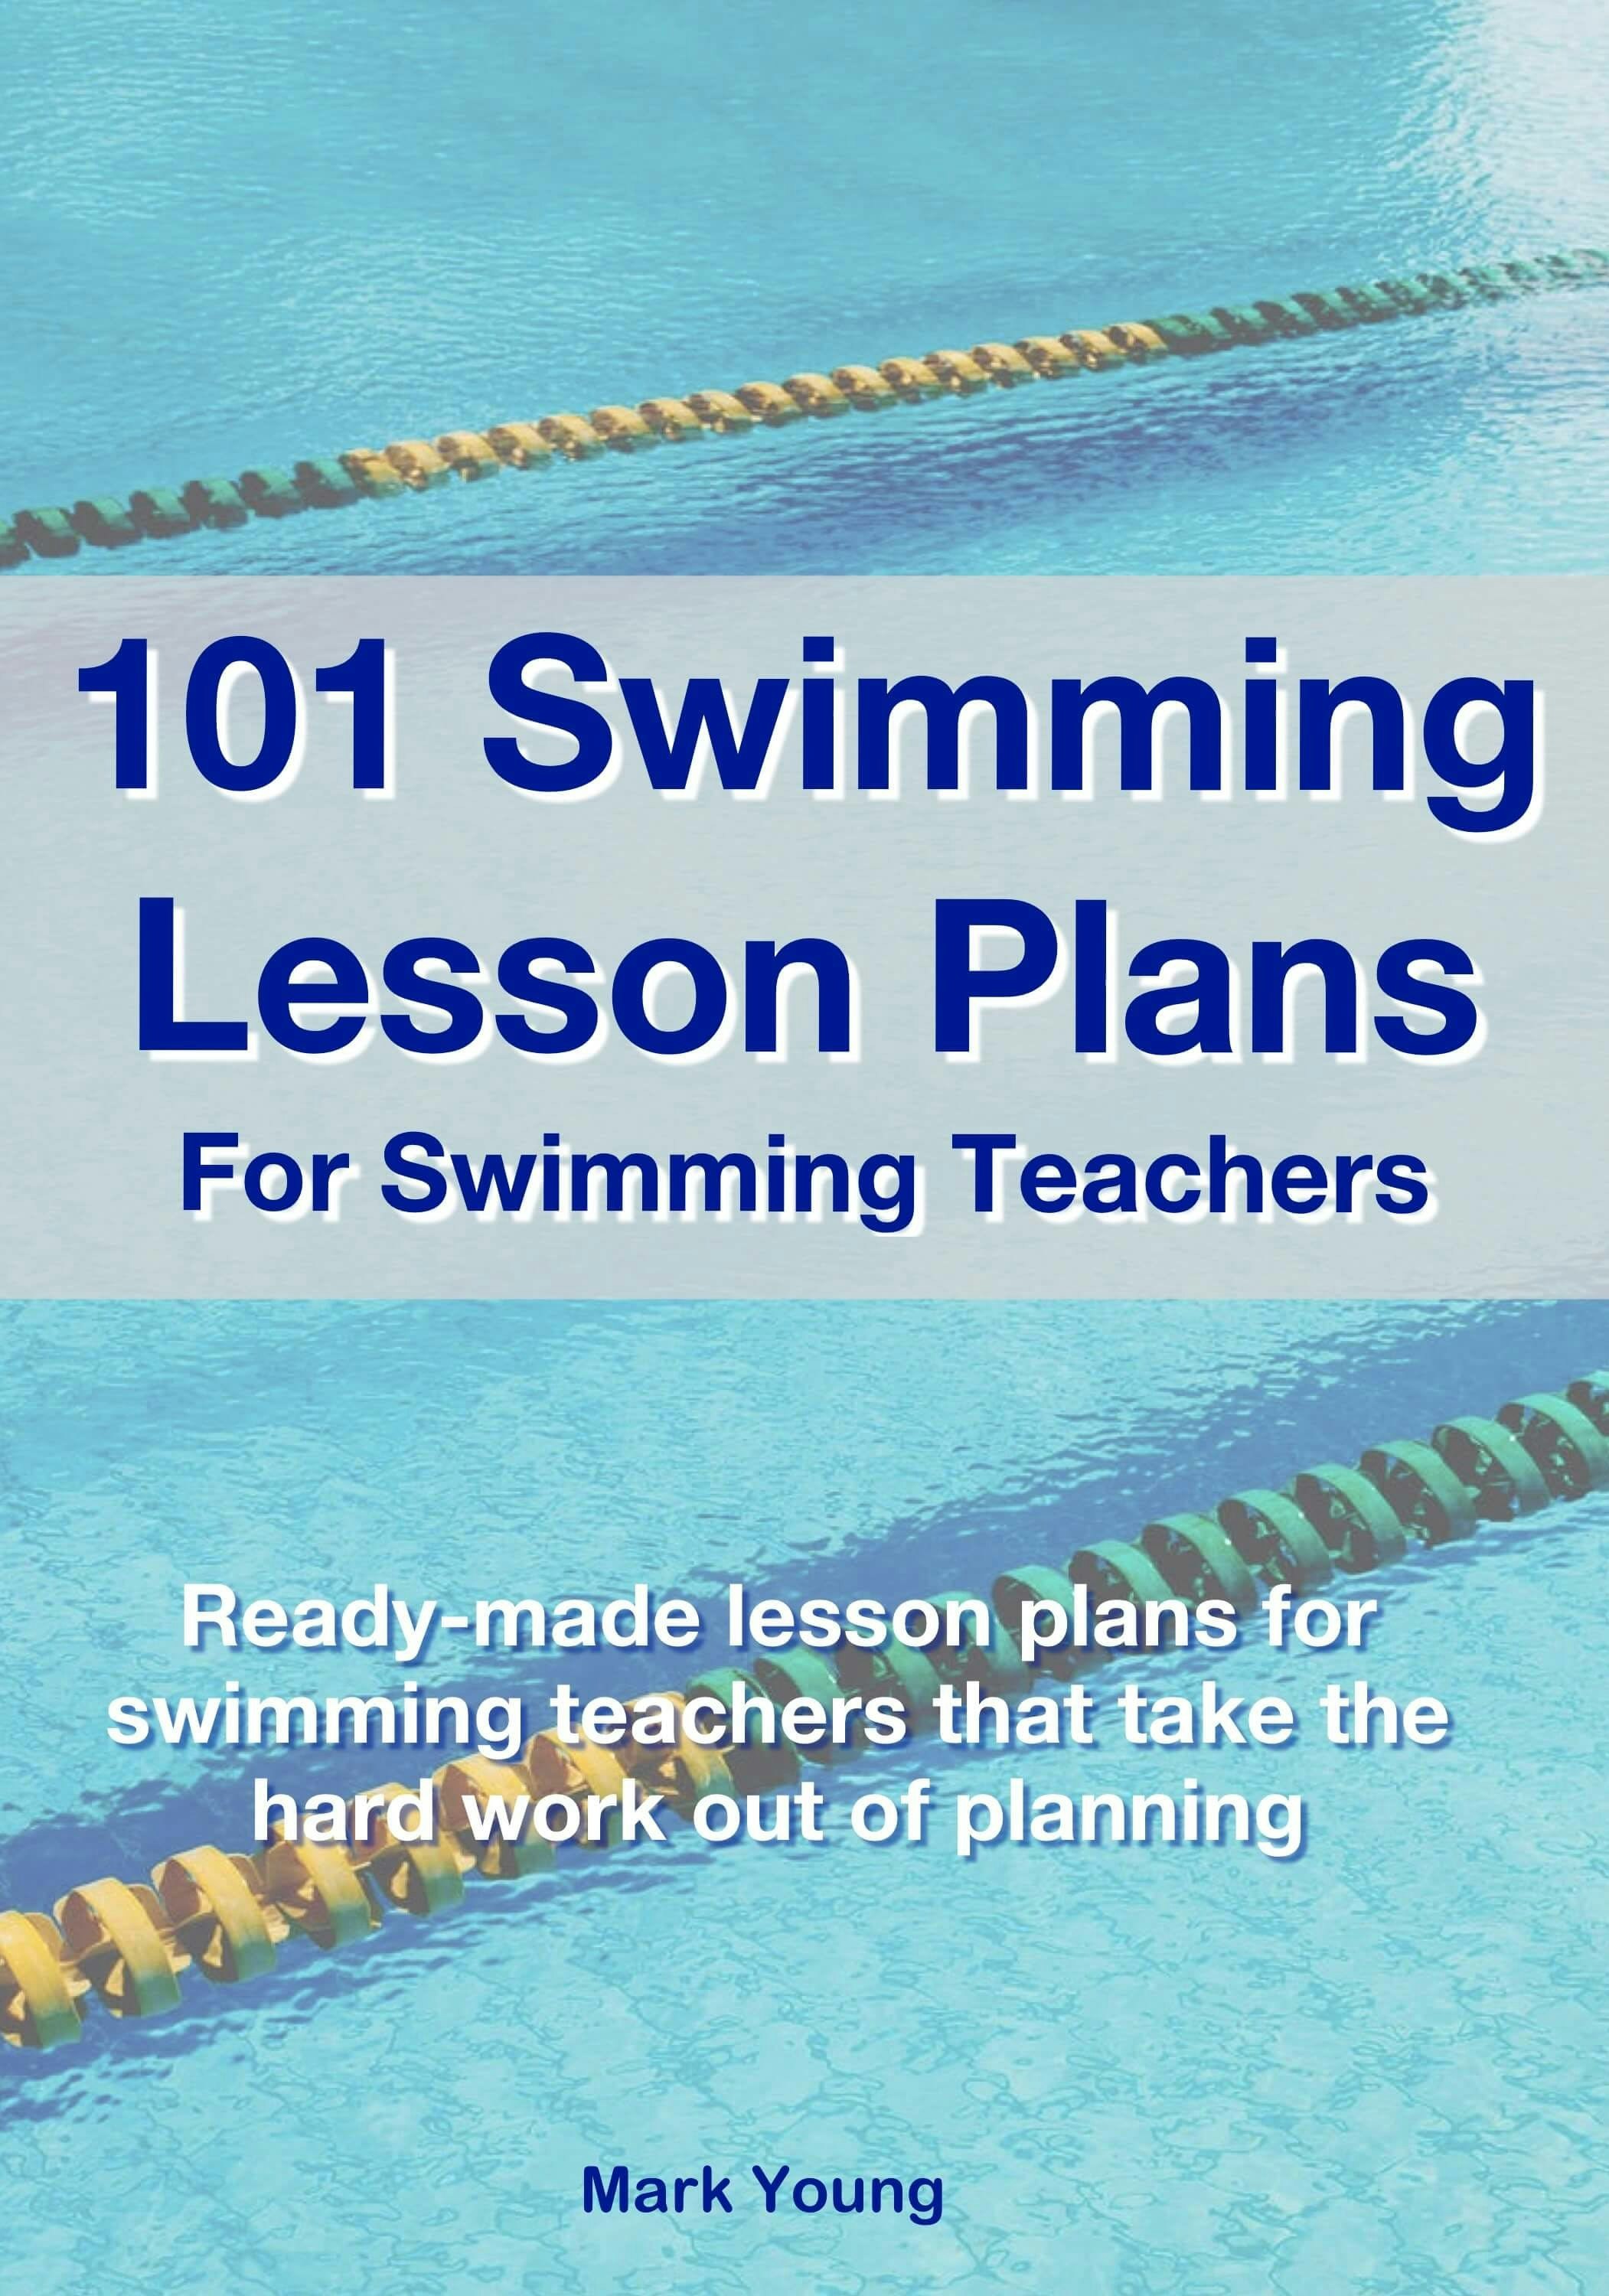 30 minute swimming lesson plan